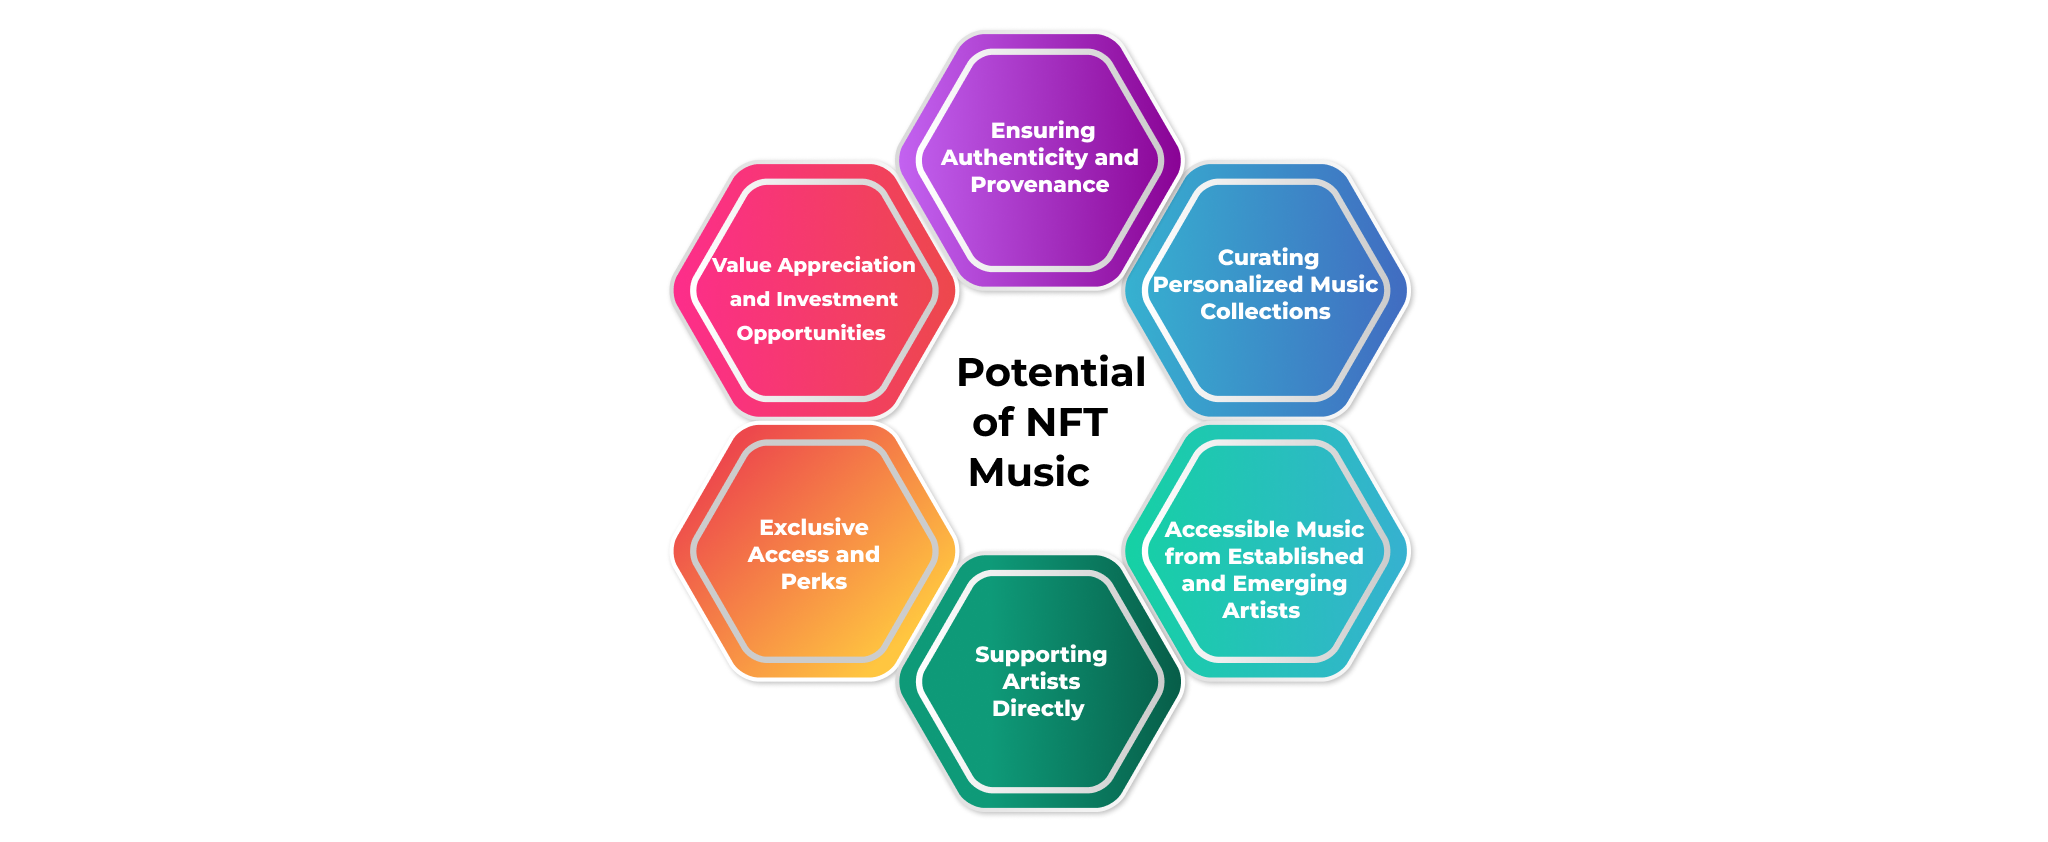 Market potential of NFT Music